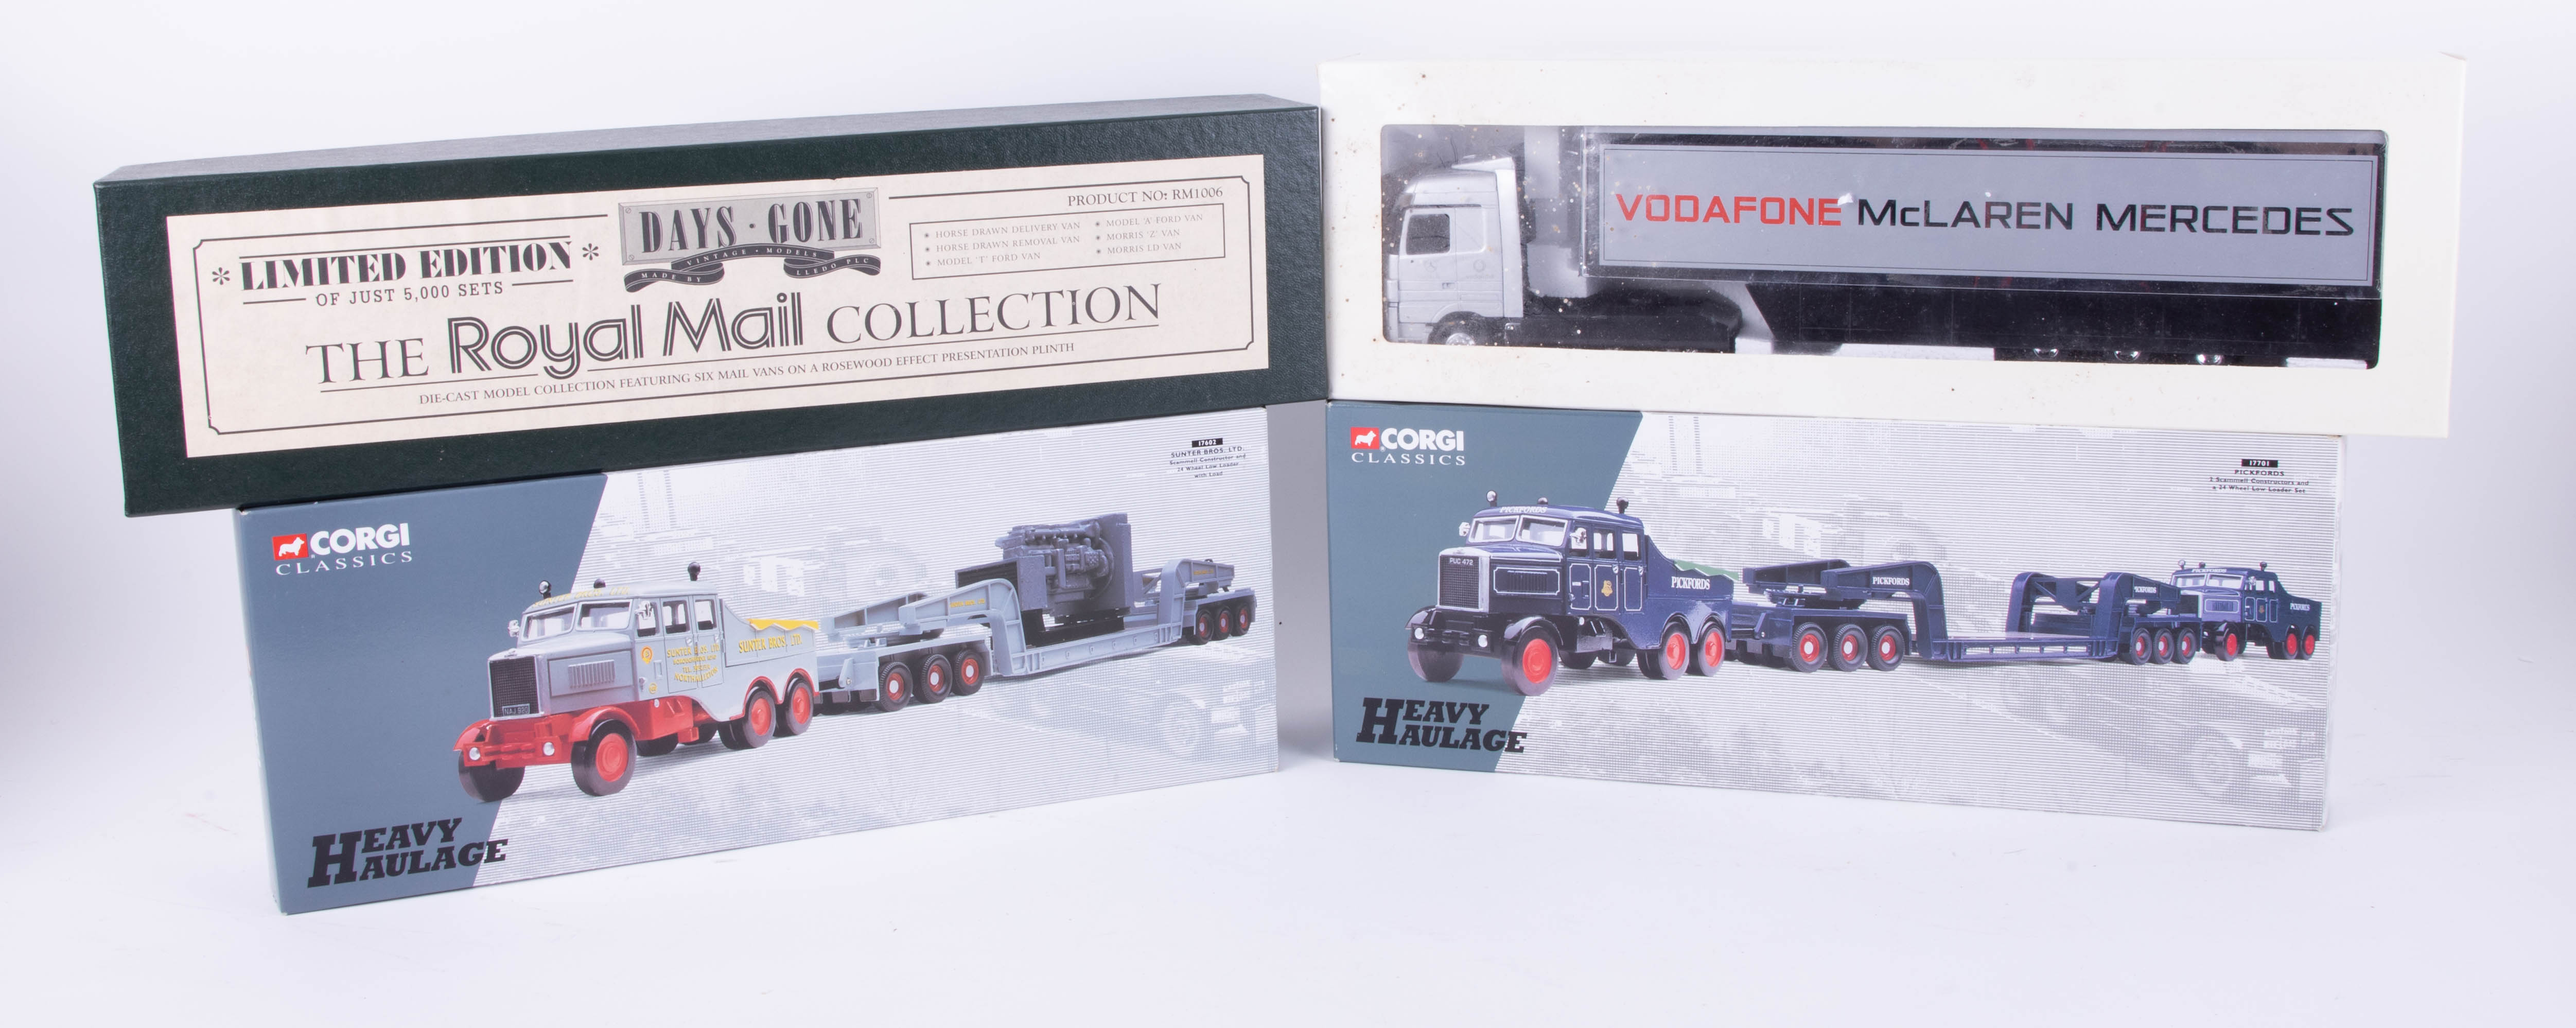 Days Gone, Limited Edition Royal Mail Collections set, Corgi Classics, two heavy Haulage sets and